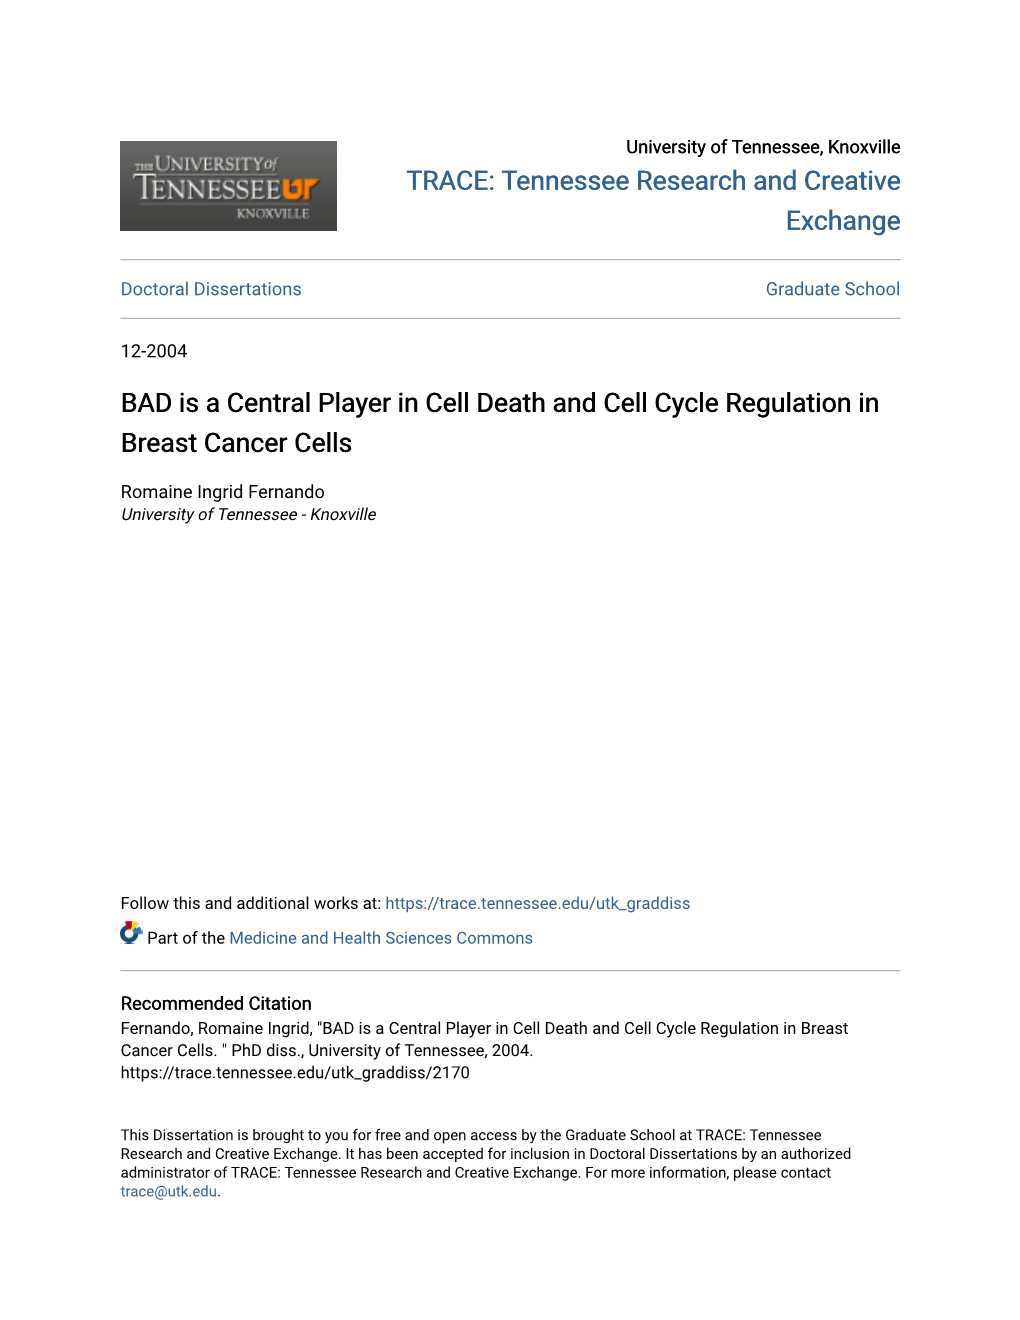 BAD Is a Central Player in Cell Death and Cell Cycle Regulation in Breast Cancer Cells